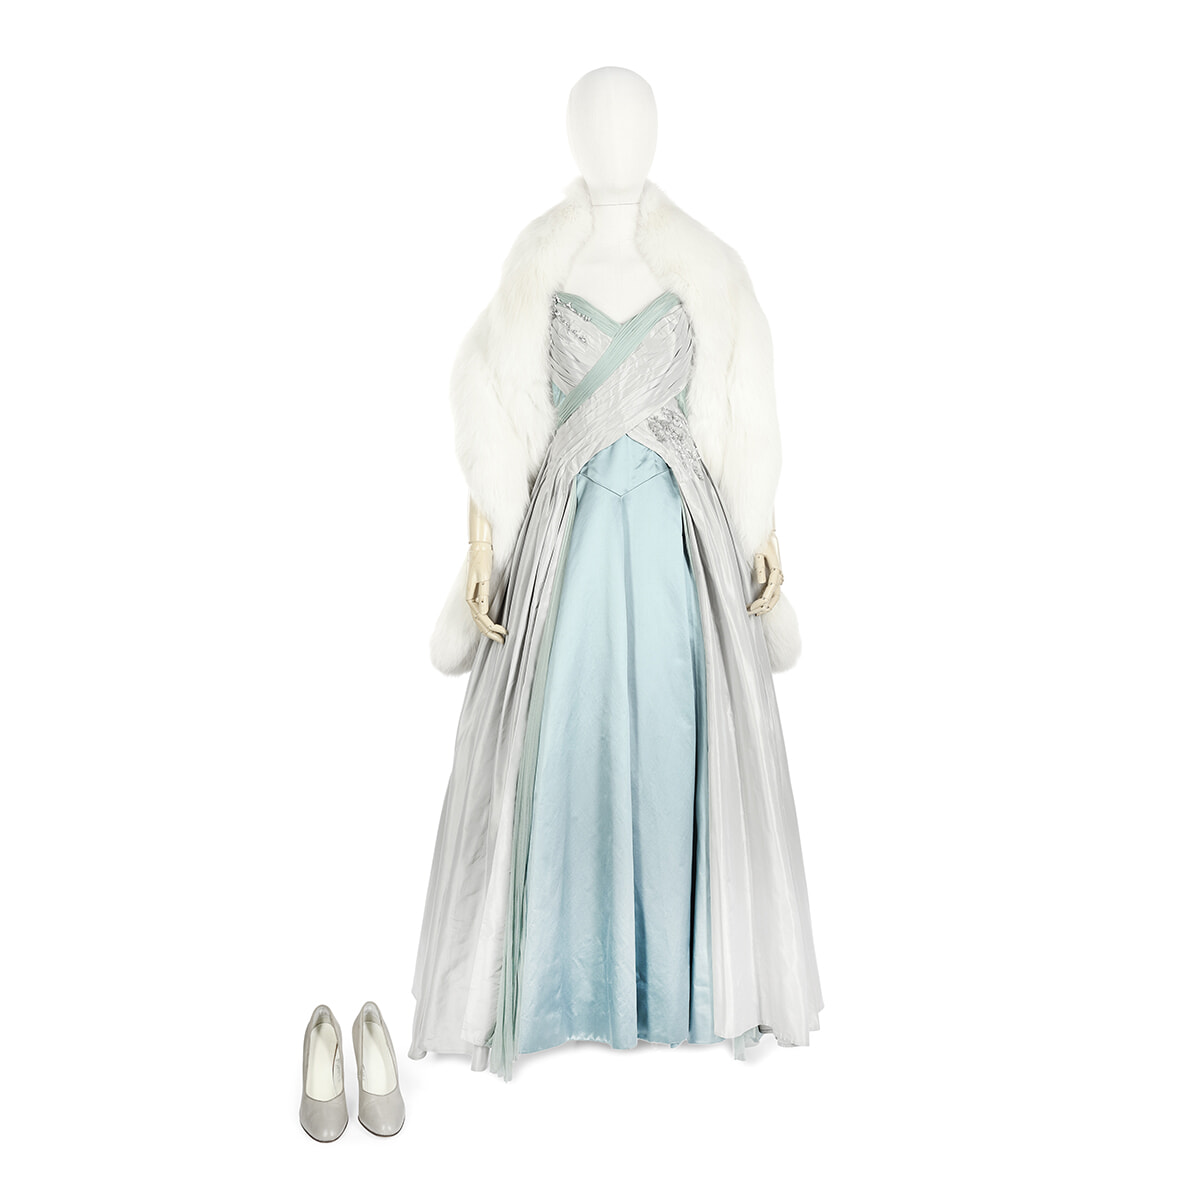 240124_Claire Foy (as The Queen)_ Powder blue ballgown worn in the promotional poster with fur stole Season 1 Episode 5  £5,000-7,000.jpg